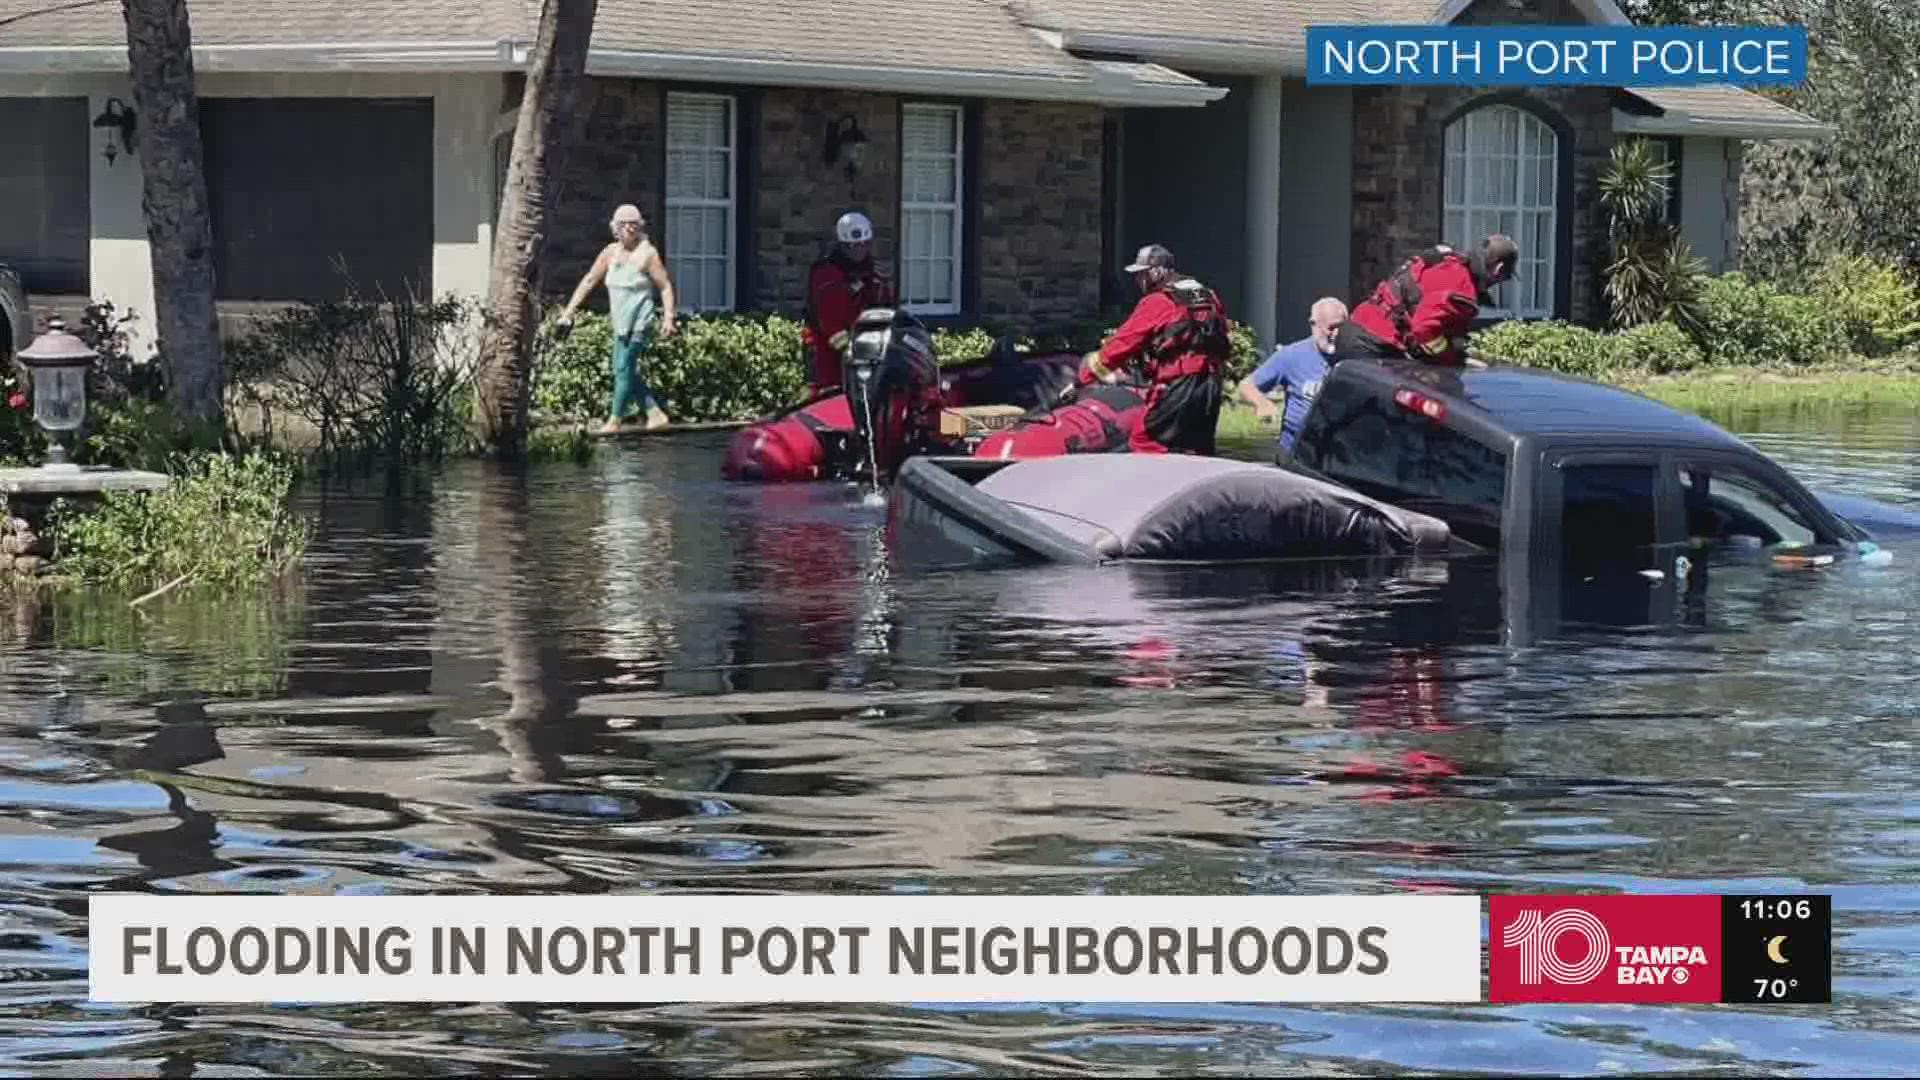 North Port police are surveying the damage and are searching for anyone in need of help.